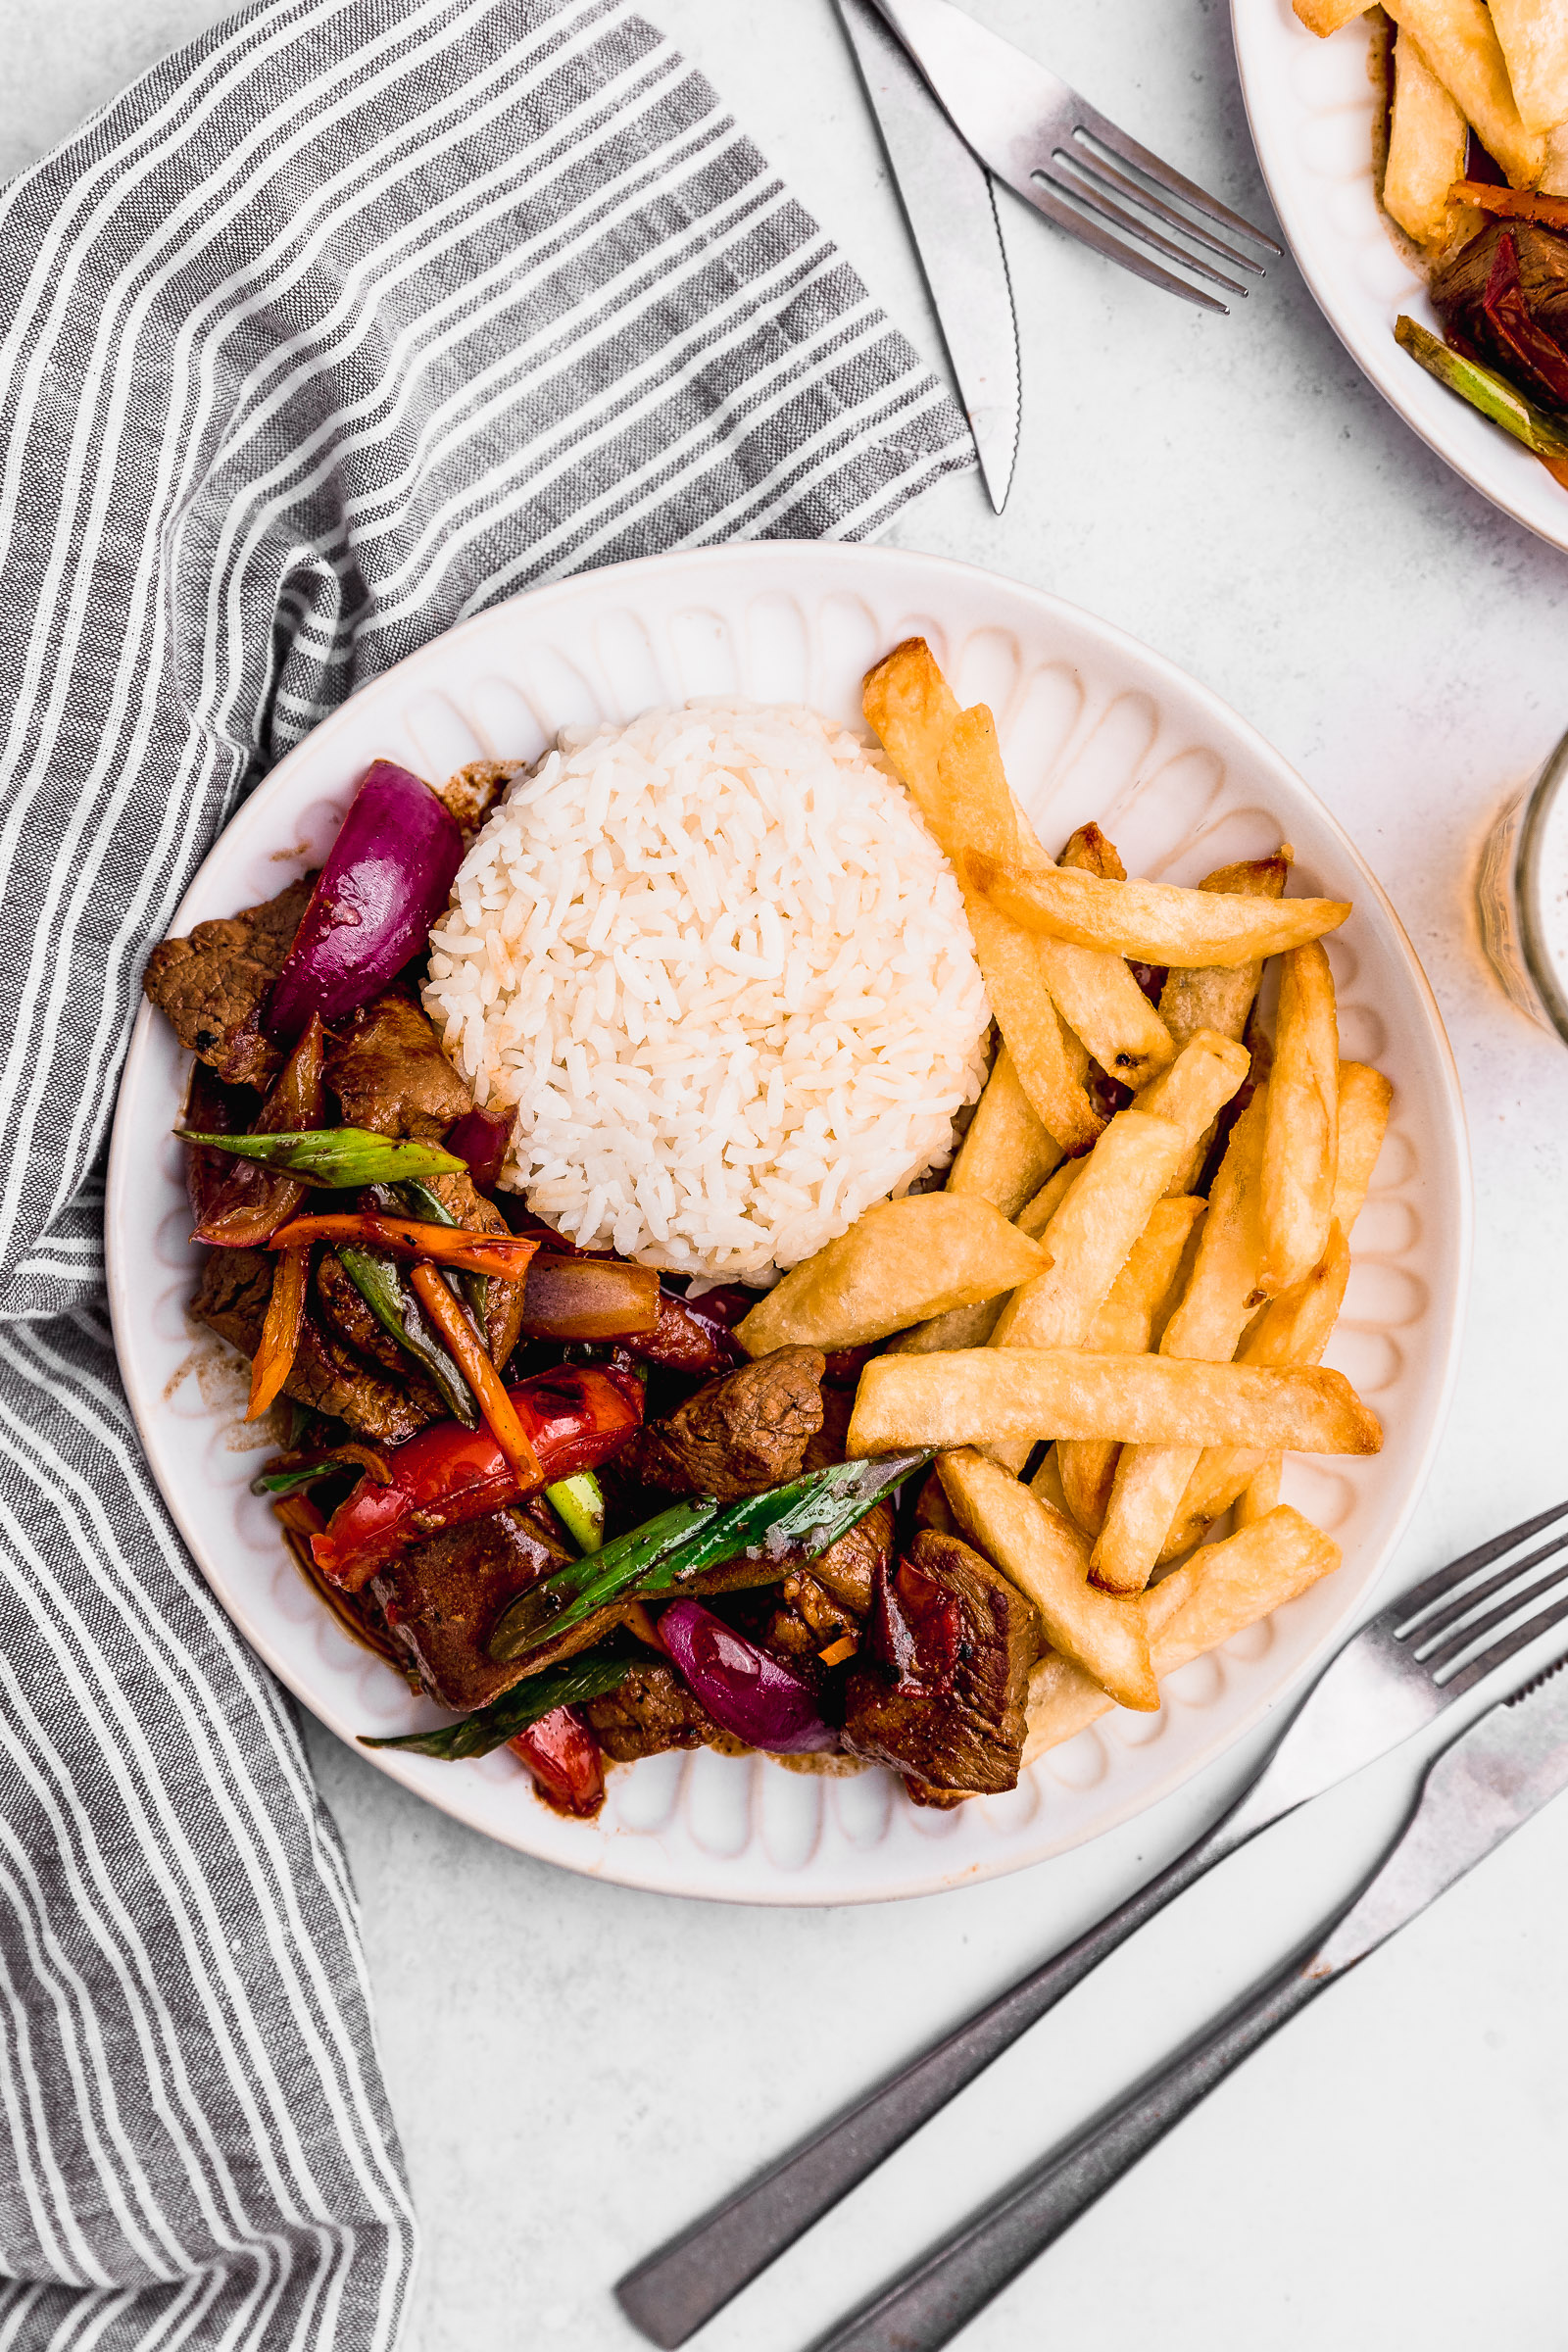 Top view of a dish of Peruvian lomo saltado. In the dish there's white rice, fries and the lomo saltado.